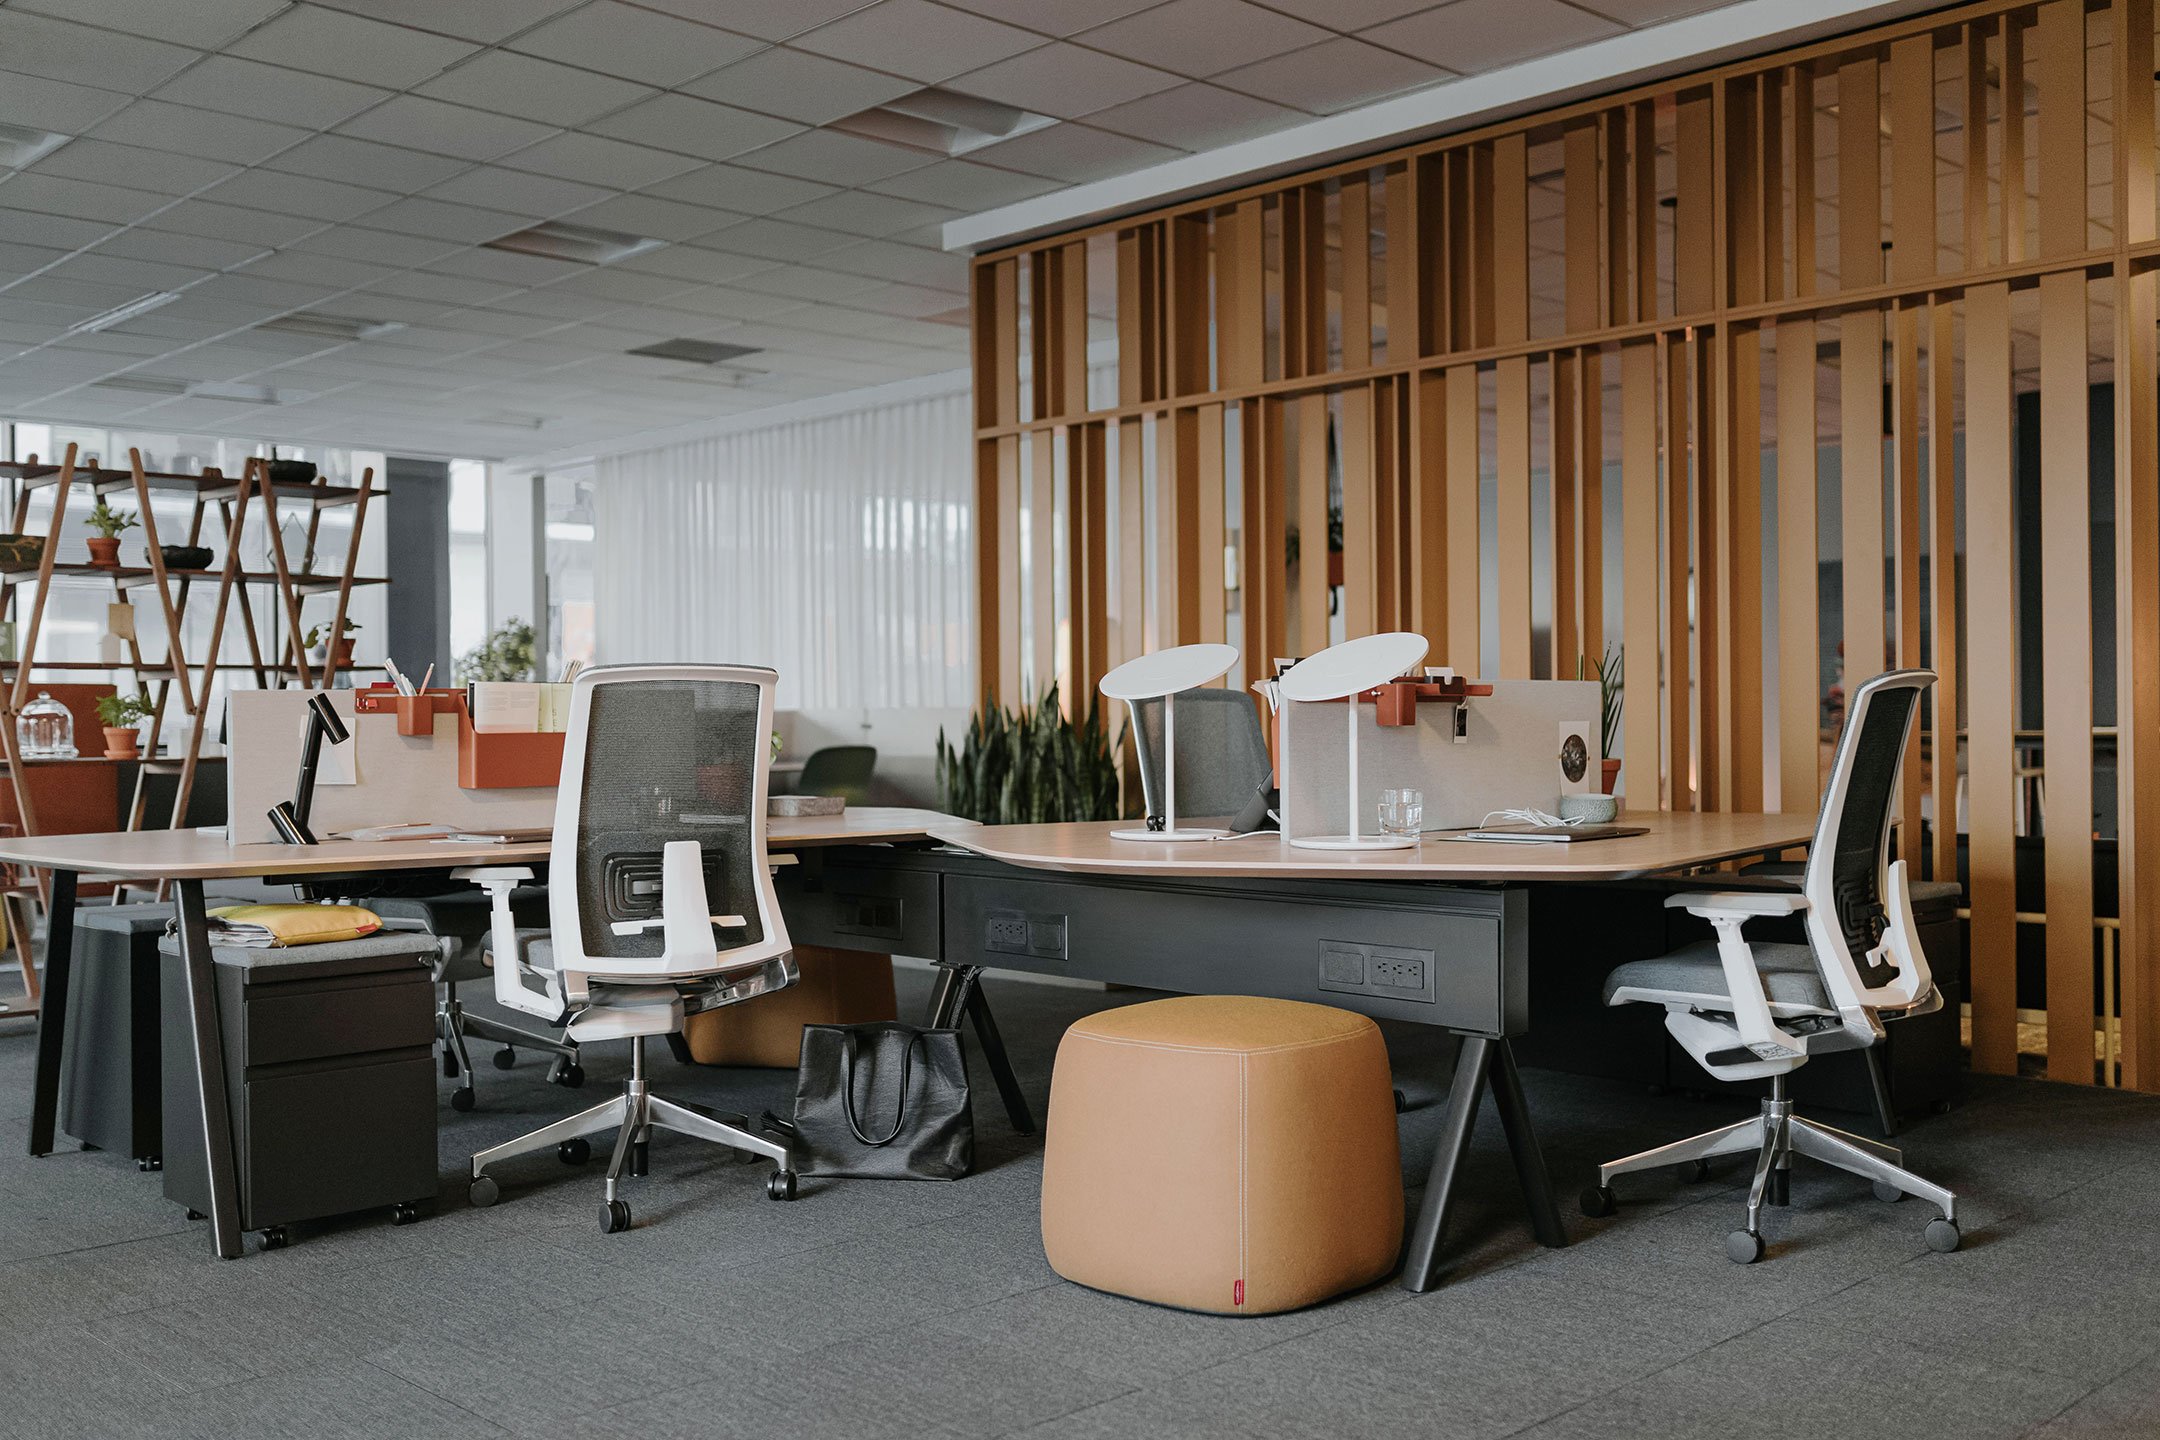 Haworth Compose Beam Divider in office space with wood wall and desk